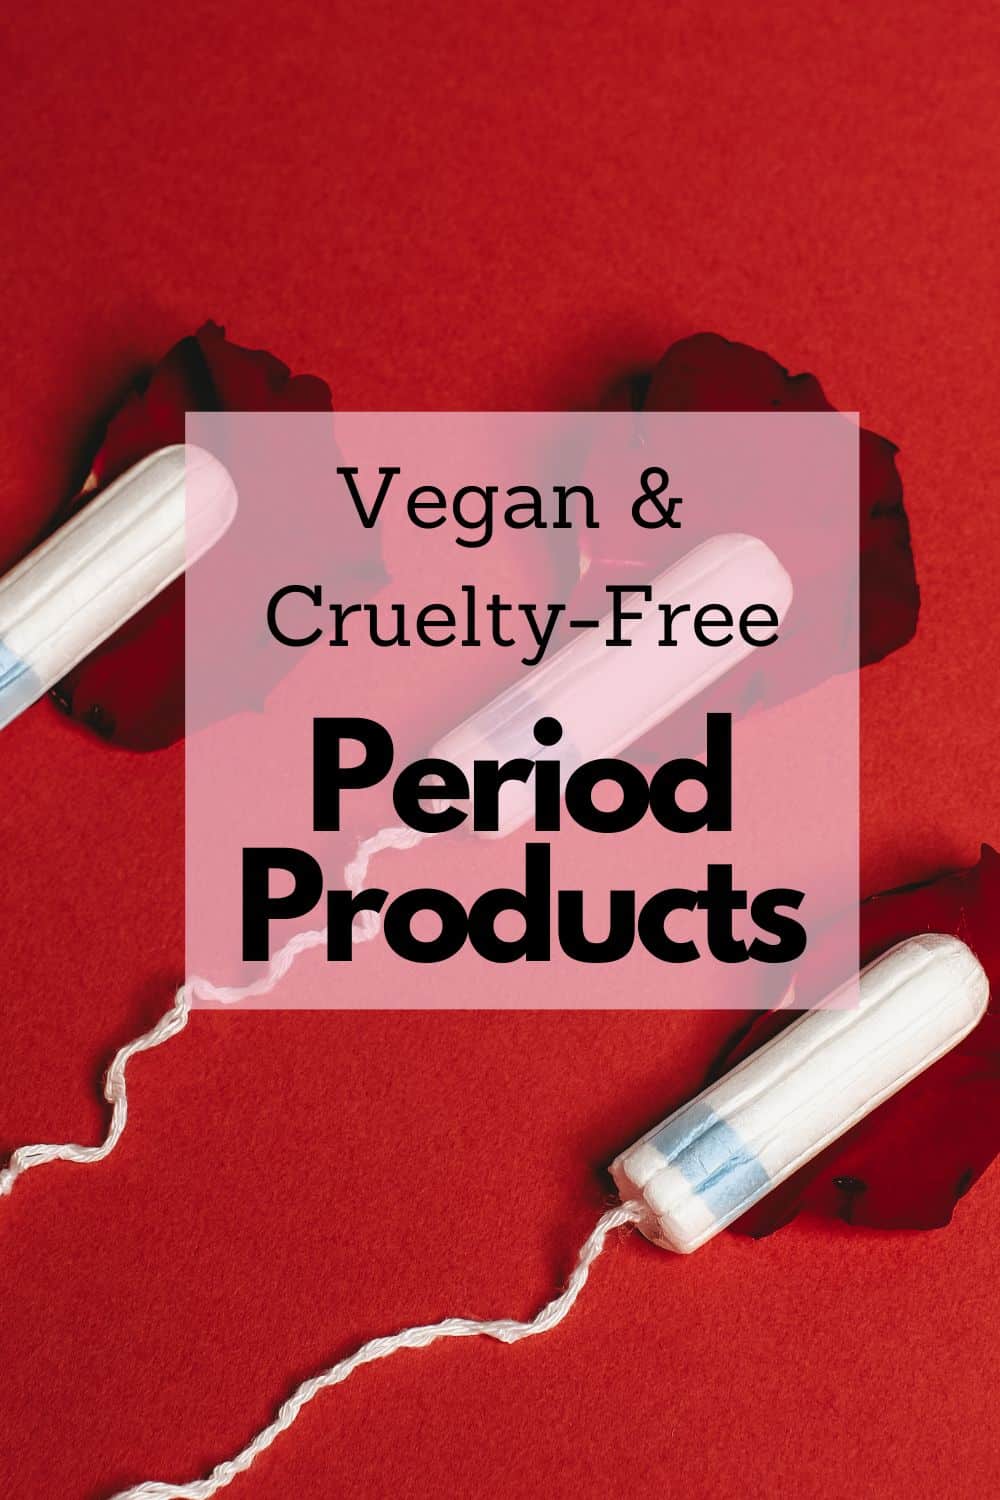 Cruelty-Free Period Products